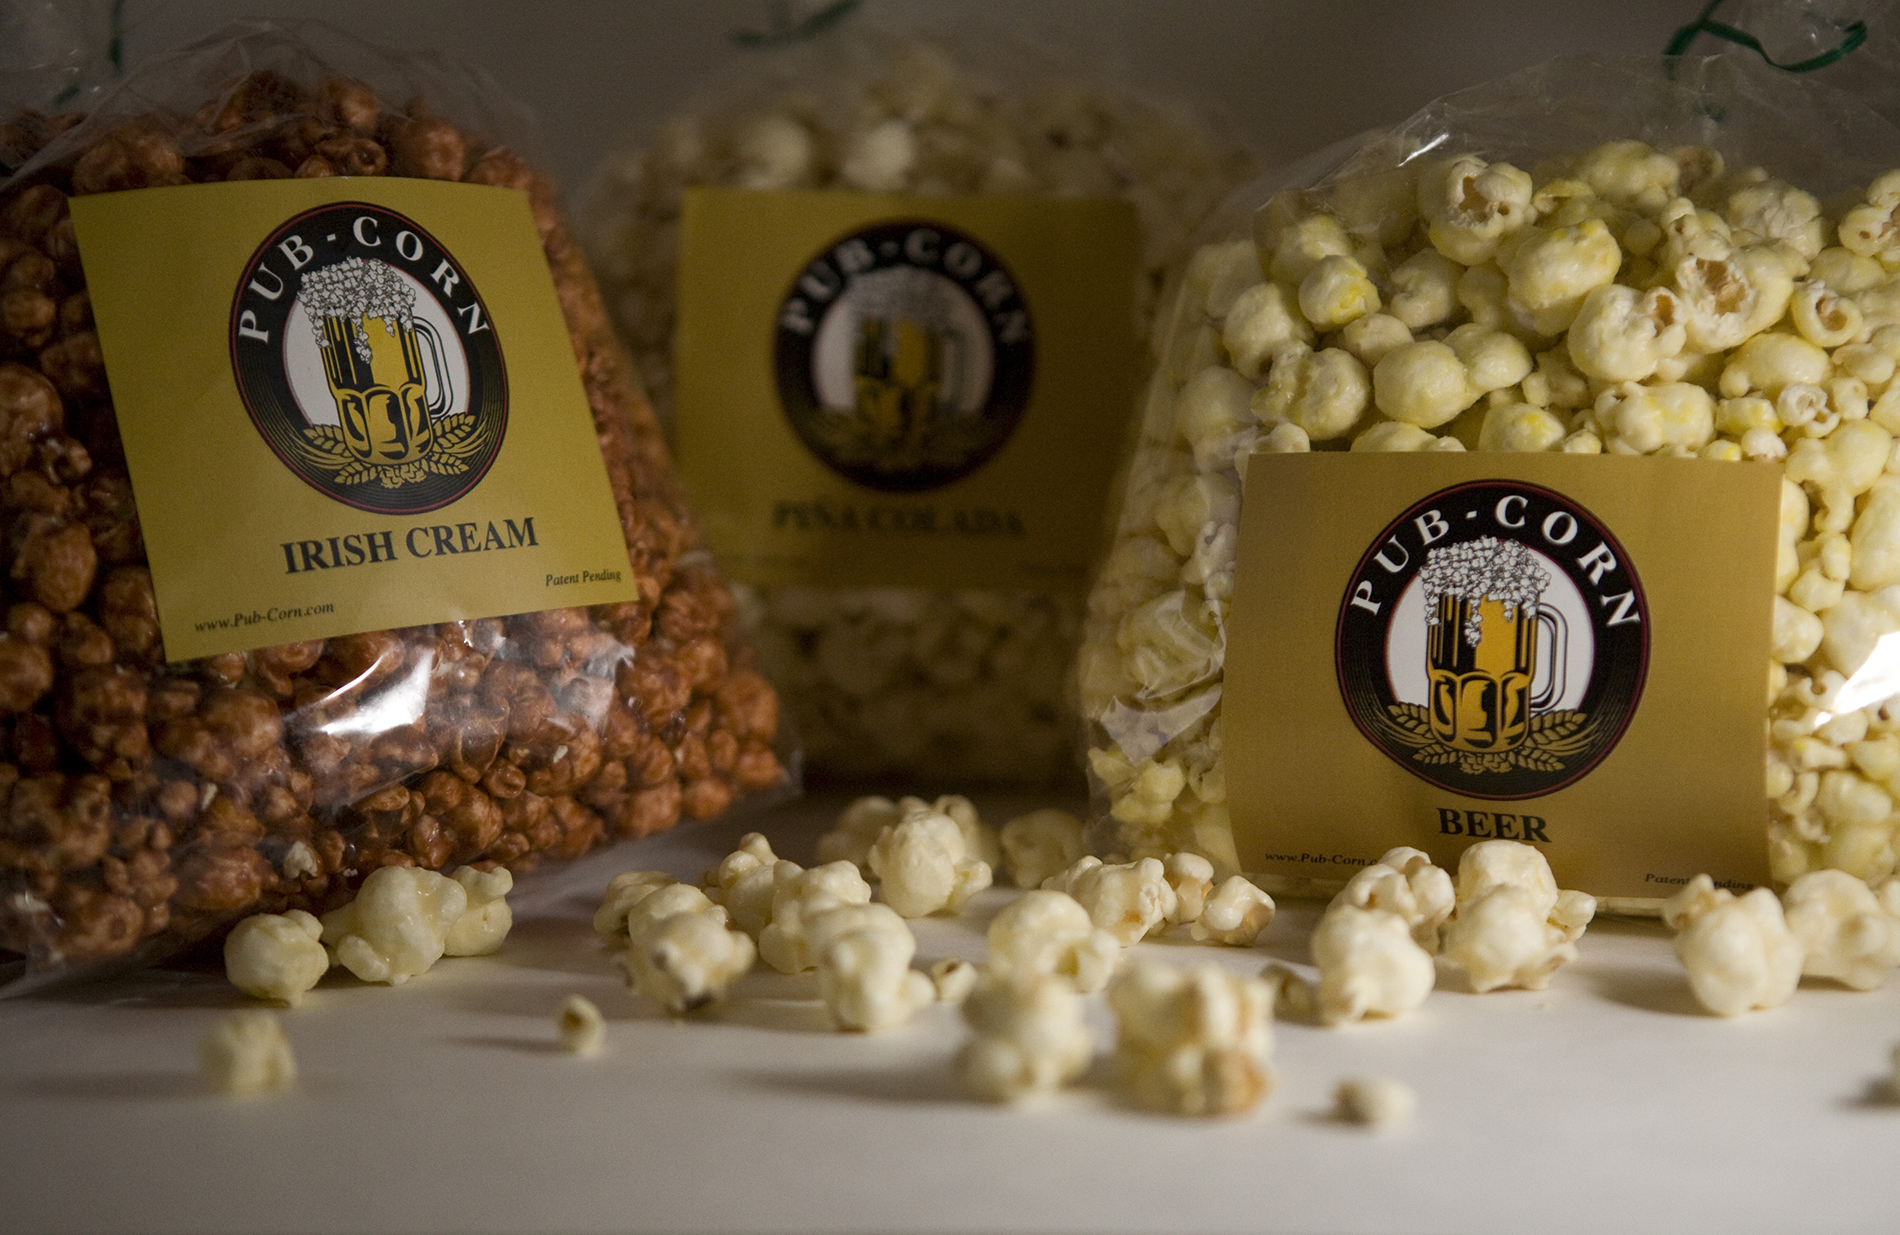 The Original Beer and Cocktail Flavored Popcorn!